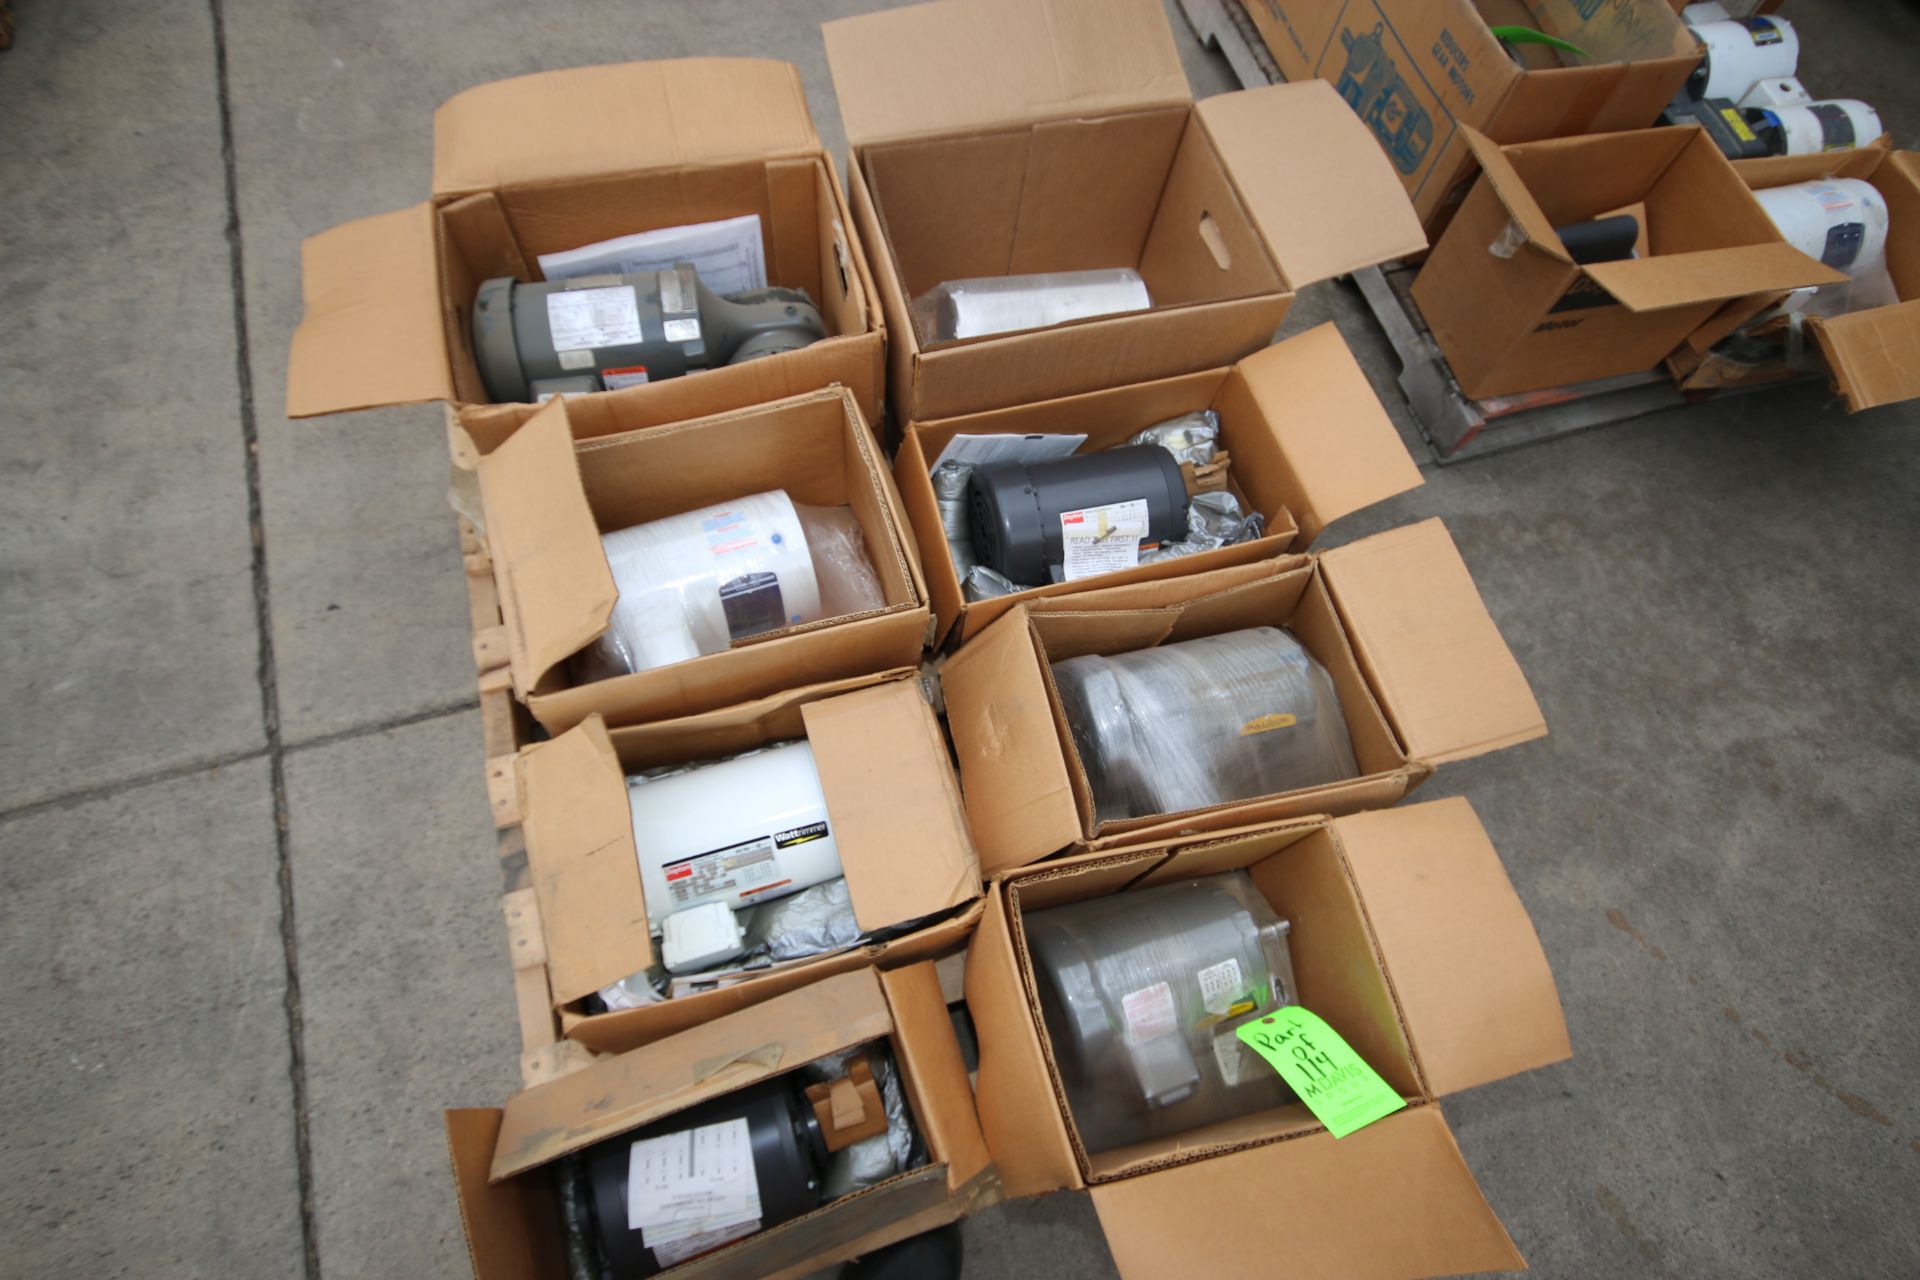 2-Pallets of NEW Motors and Drives, Includes Aprox. (15) NEW In Box Drives/Motors , hp Range from - Image 2 of 3